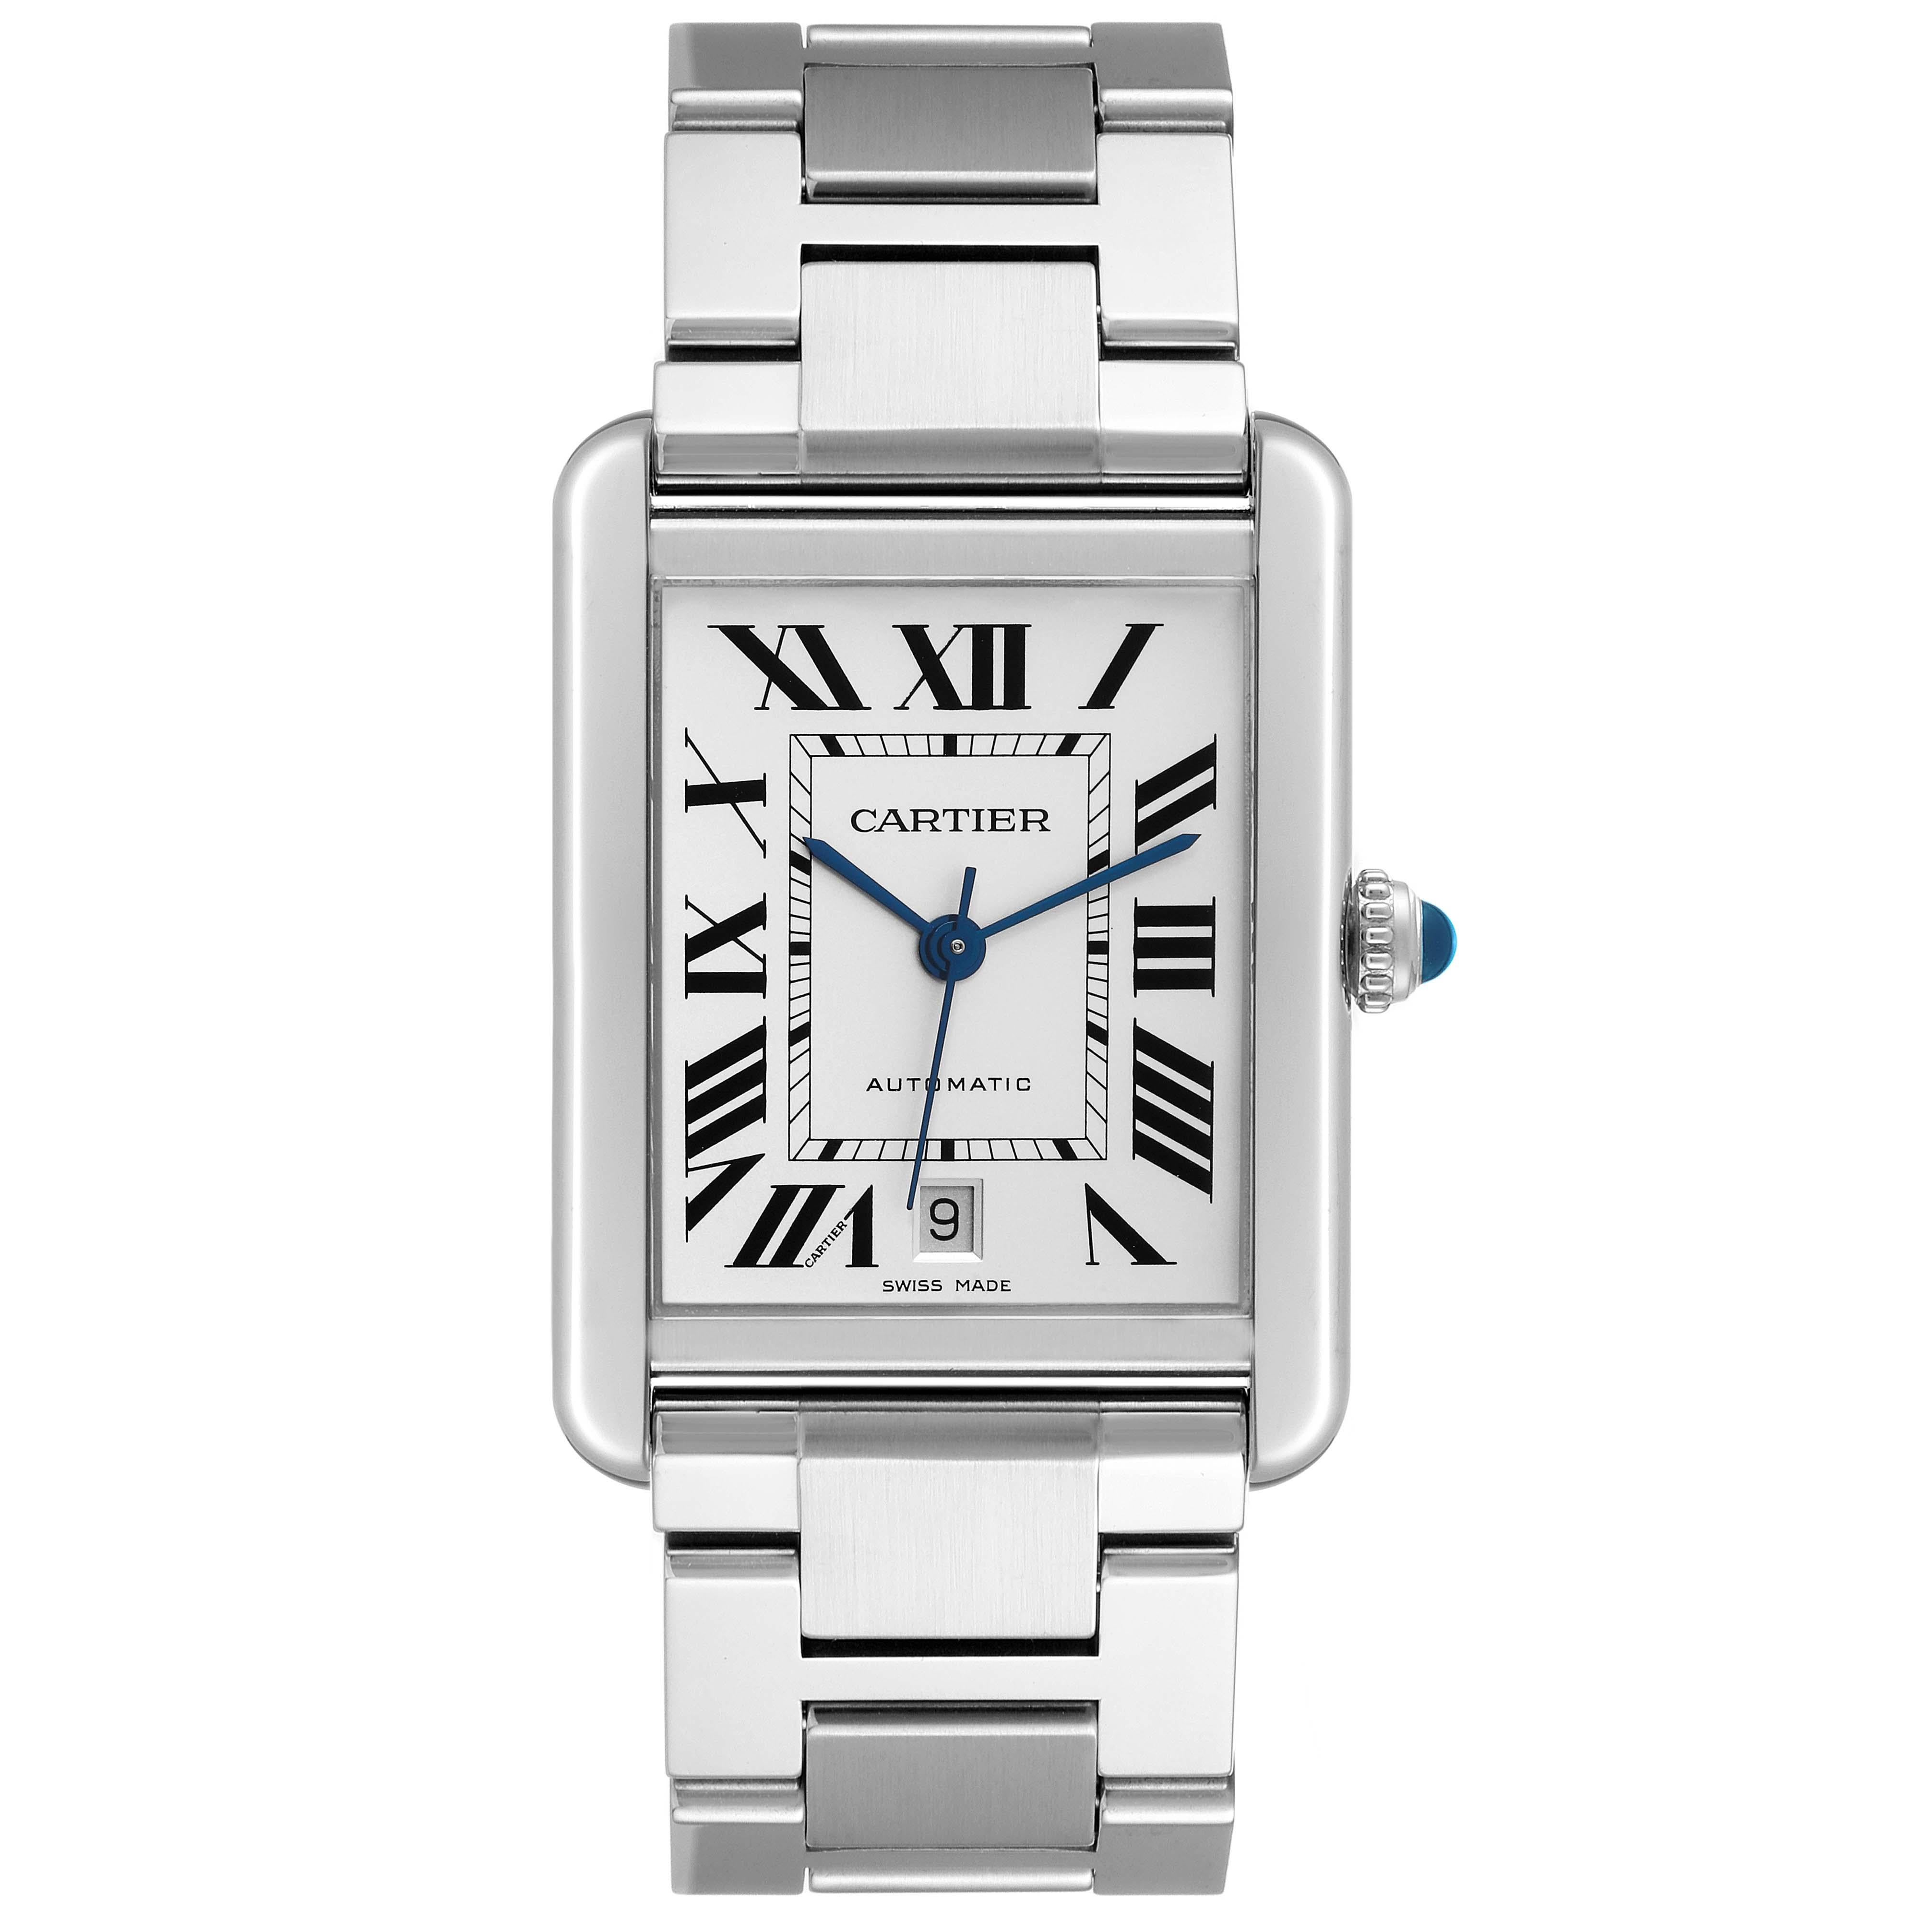 Cartier Tank Solo XL Silver Dial Automatic Steel Mens Watch W5200028 Papers. Automatic self-winding movement. Stainless steel case 31.0 x 40.85 mm. Circular grained crown set with the blue spinel cabochon. . Scratch resistant sapphire crystal.